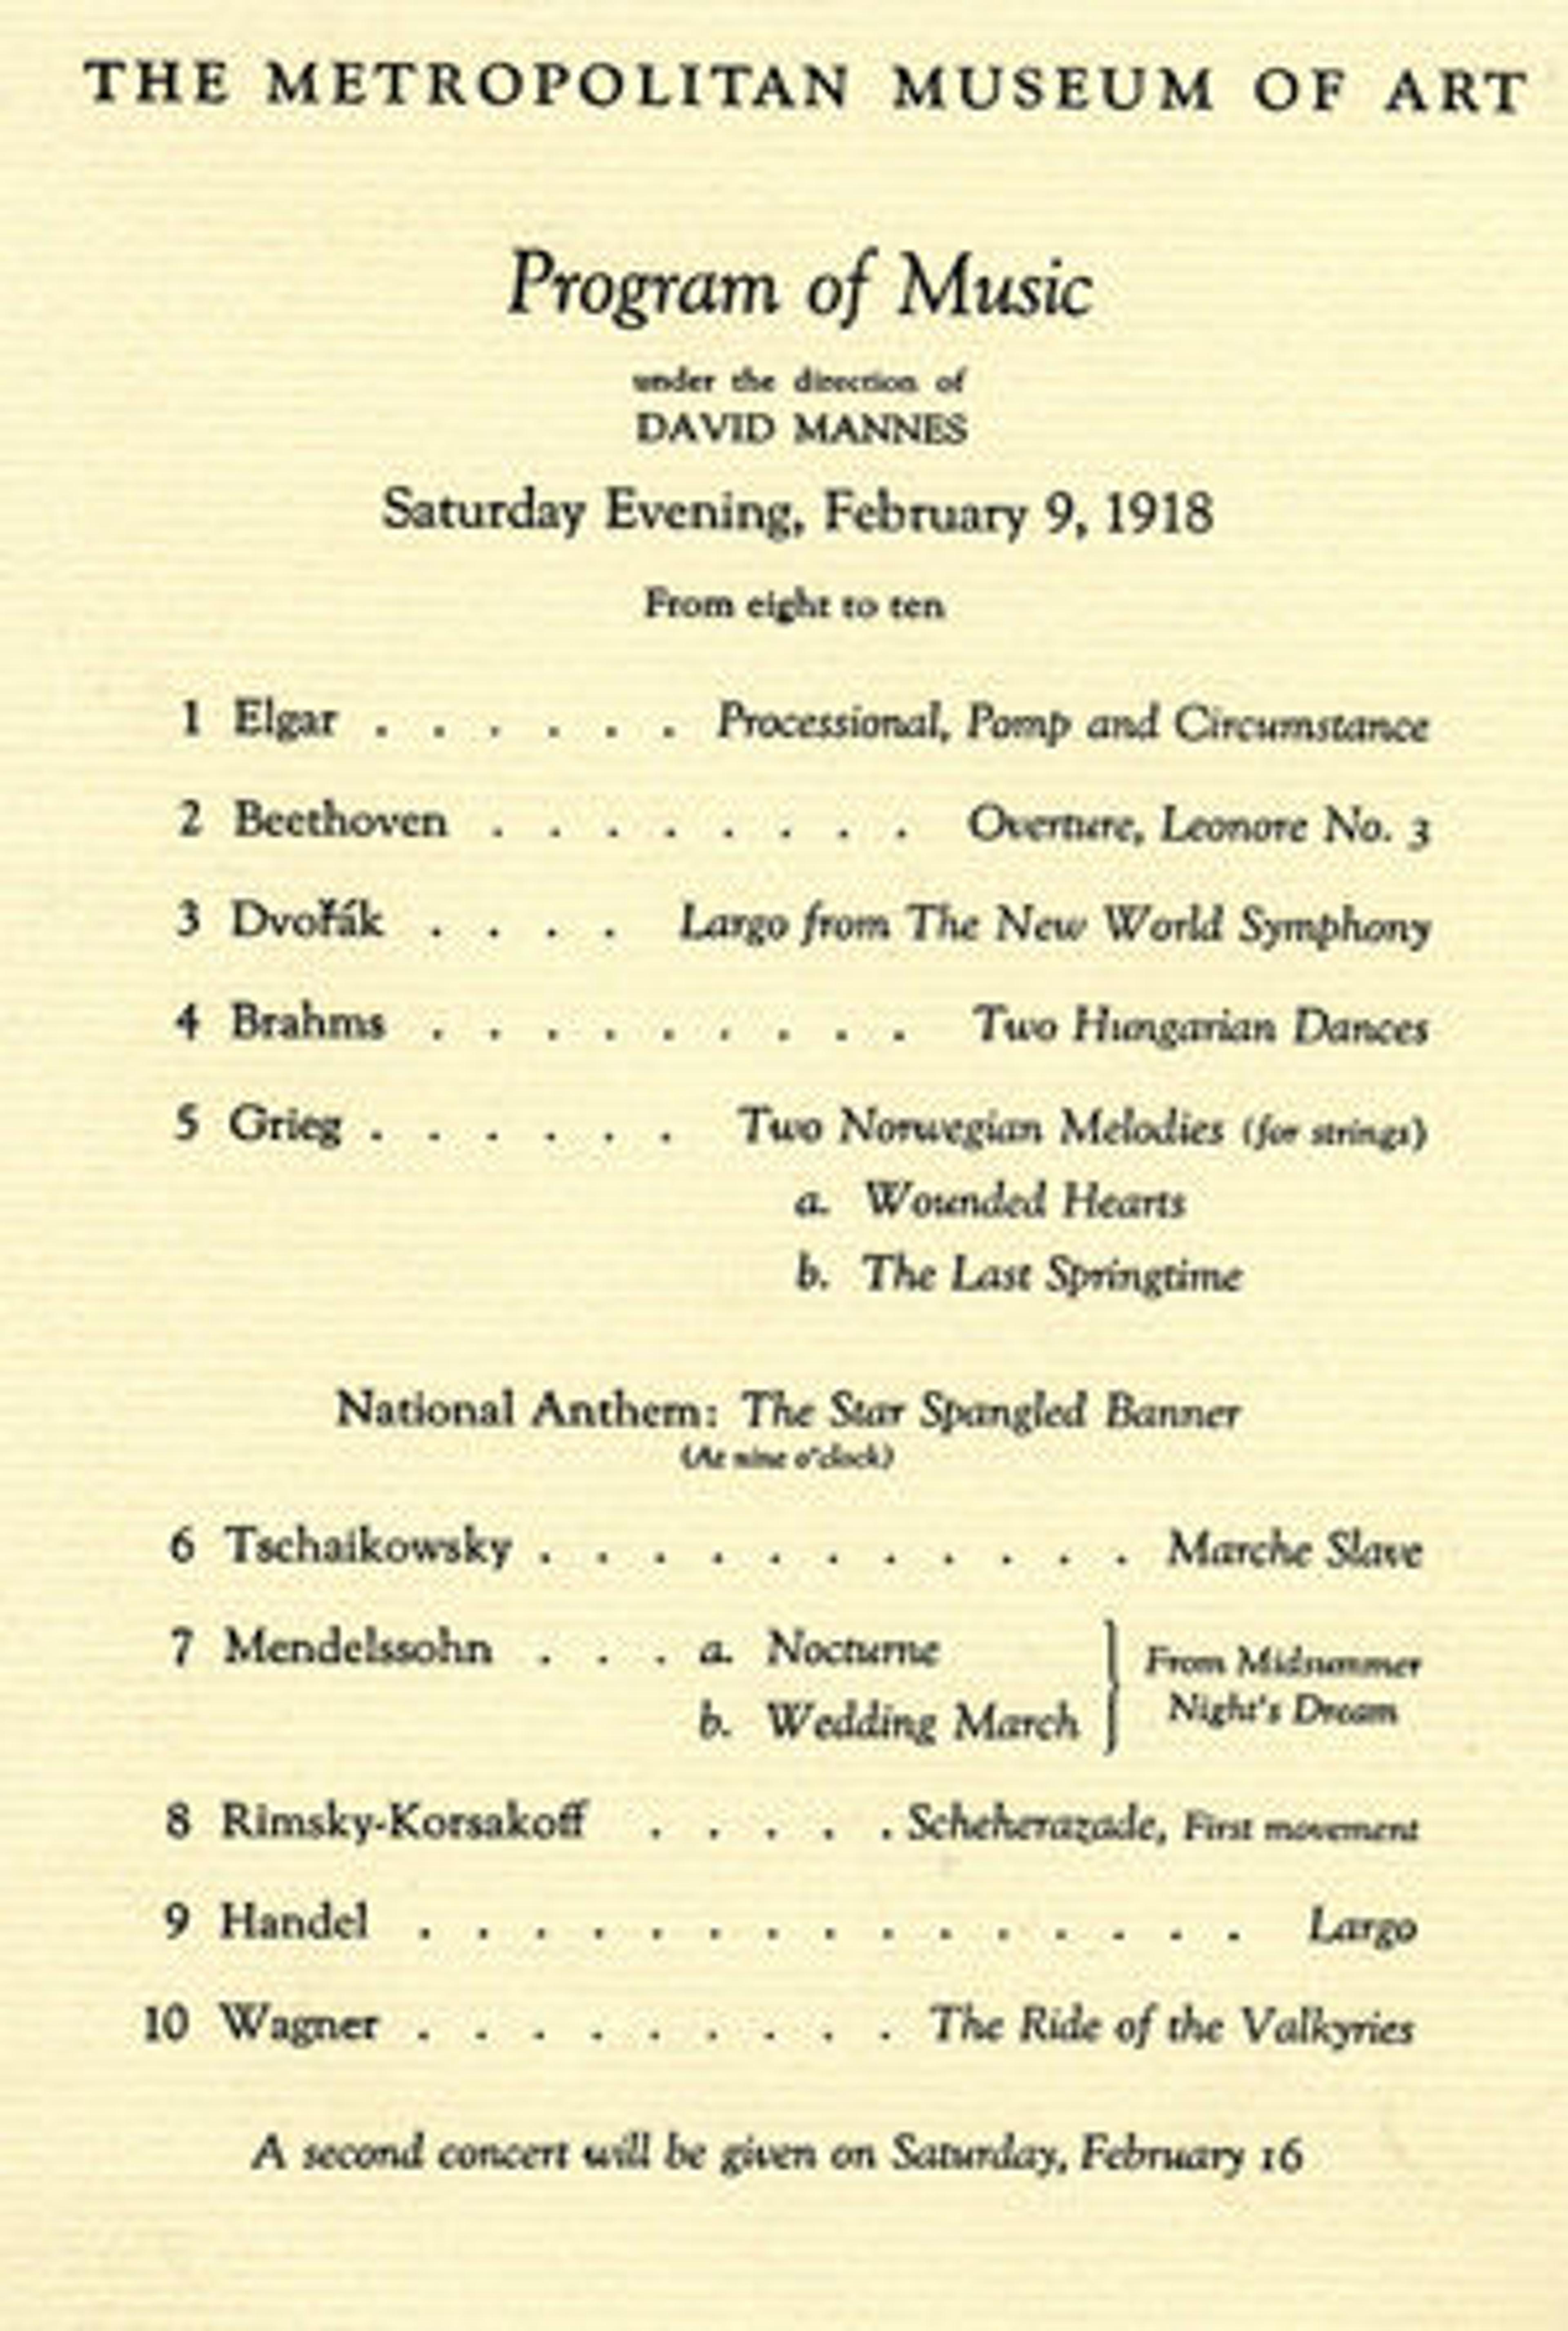 Program of the first free concert held at the Metropolitan Museum of Art